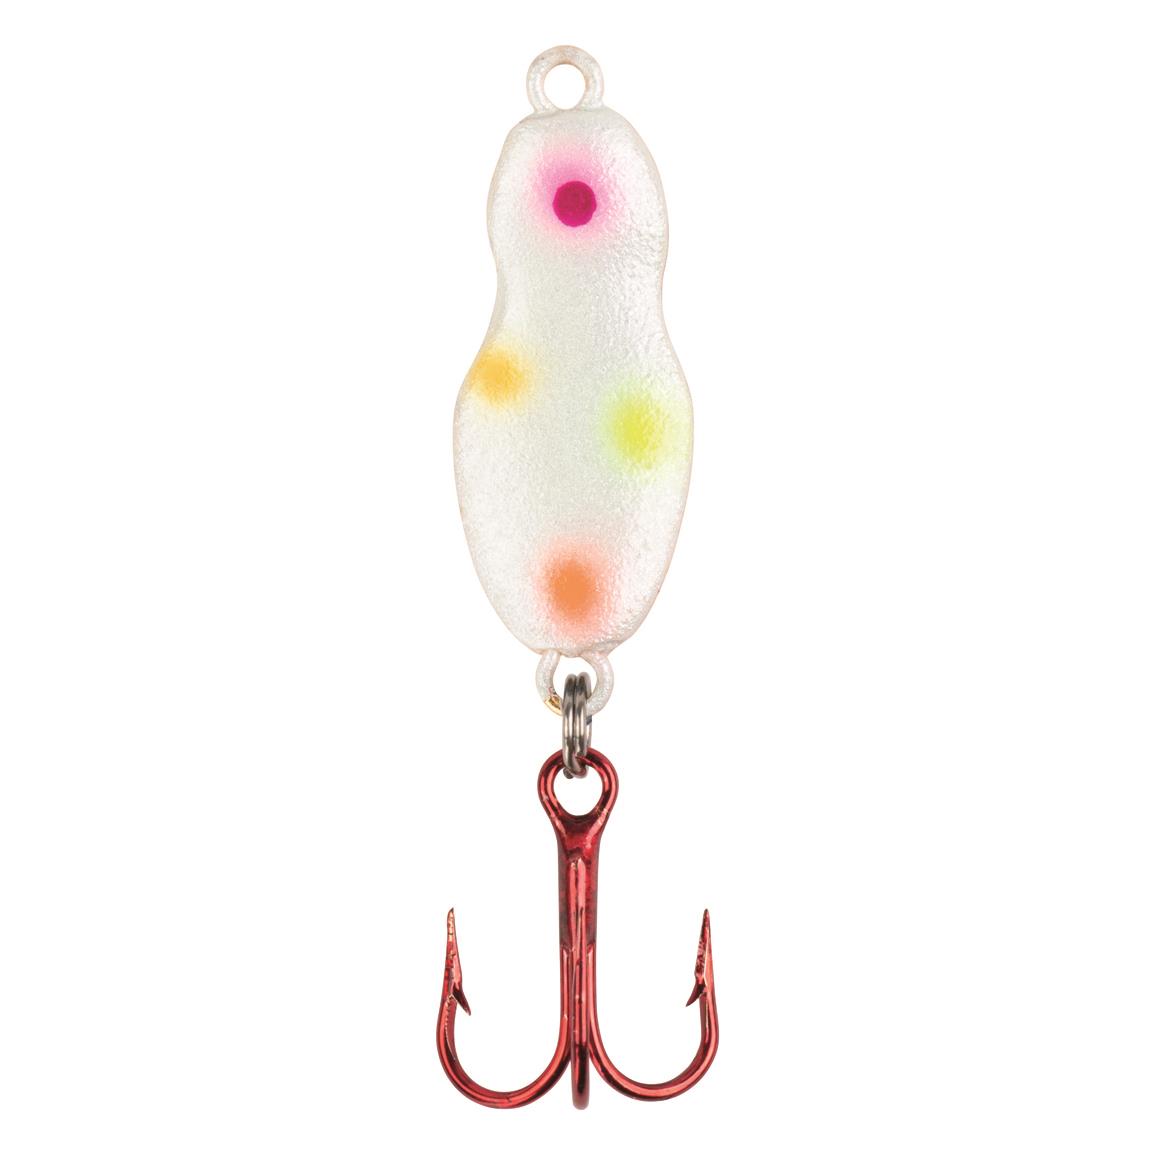 Kenders T-Rip Tungsten Mini Vibe Bait - 738216, Ice Tackle at